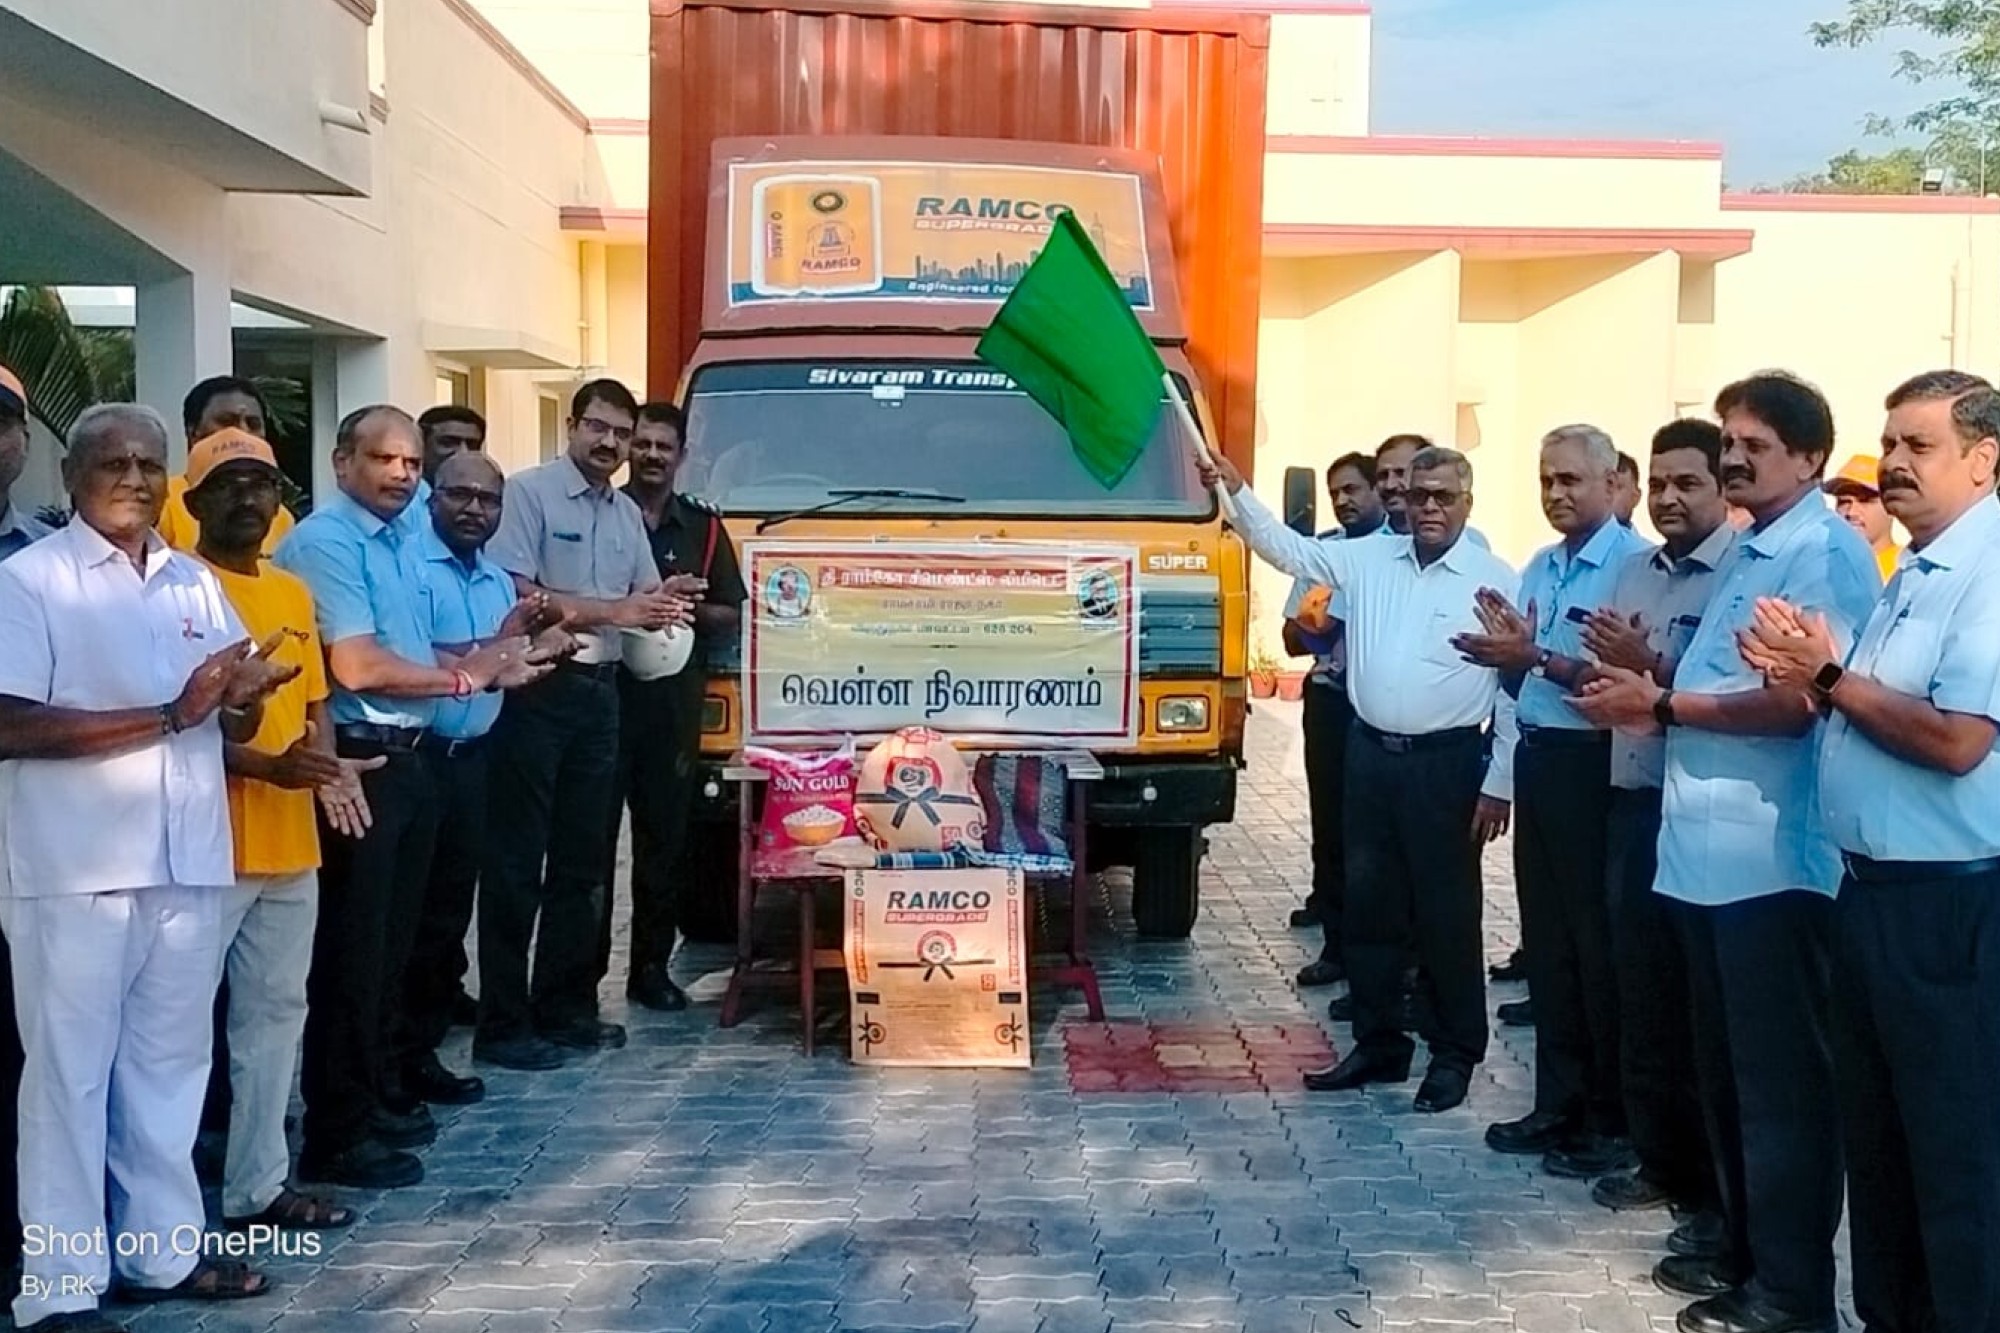 RAMCO cement’s flood relief measure in Thoothukudi